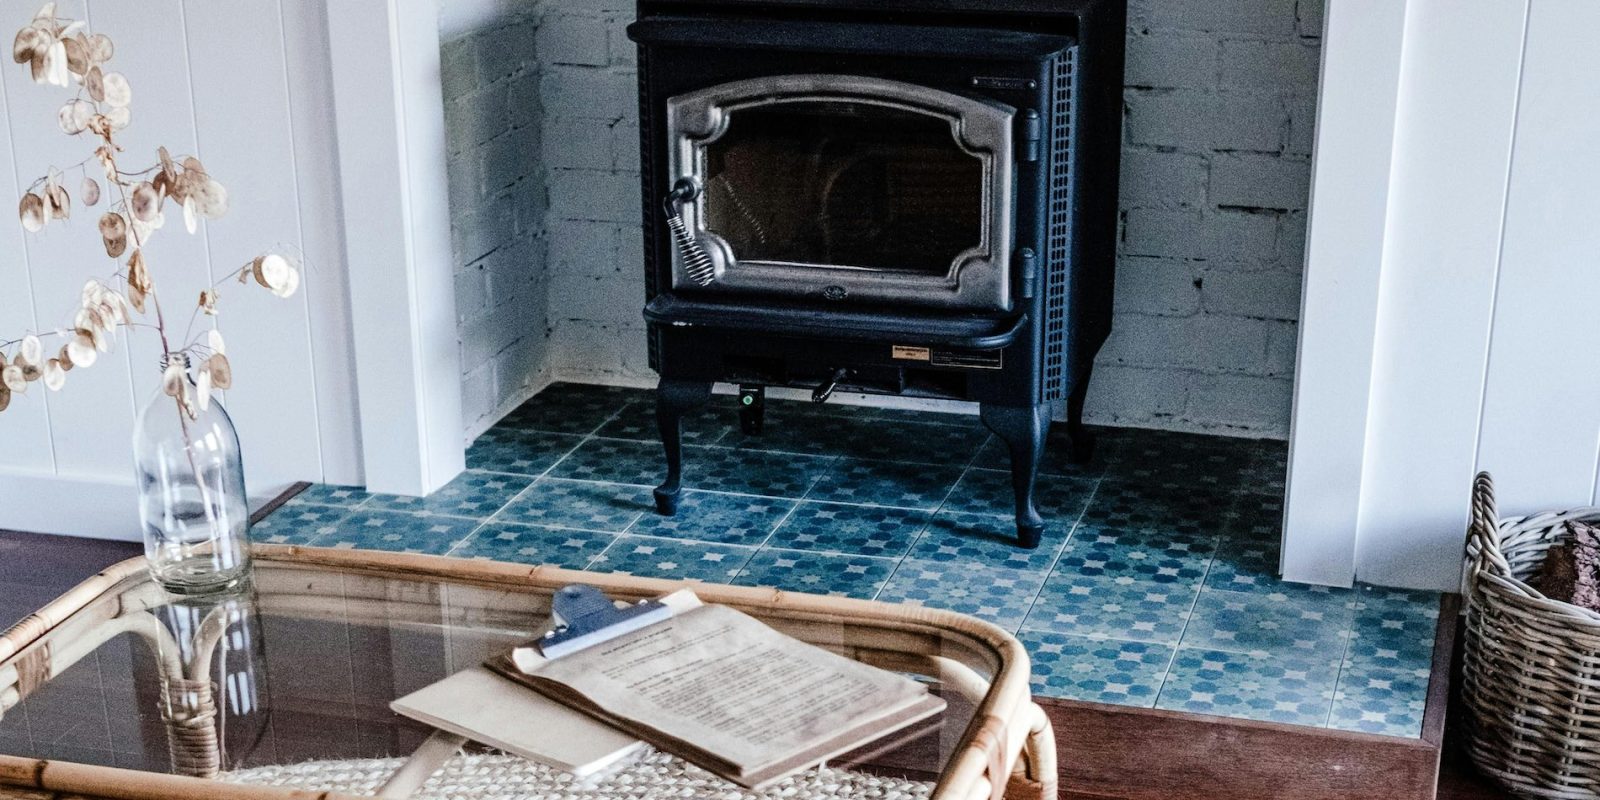 A warm fire: a potential reality for Aotea homes under the Warmer Kiwi Homes program. Photo / Rachel Claire / CC